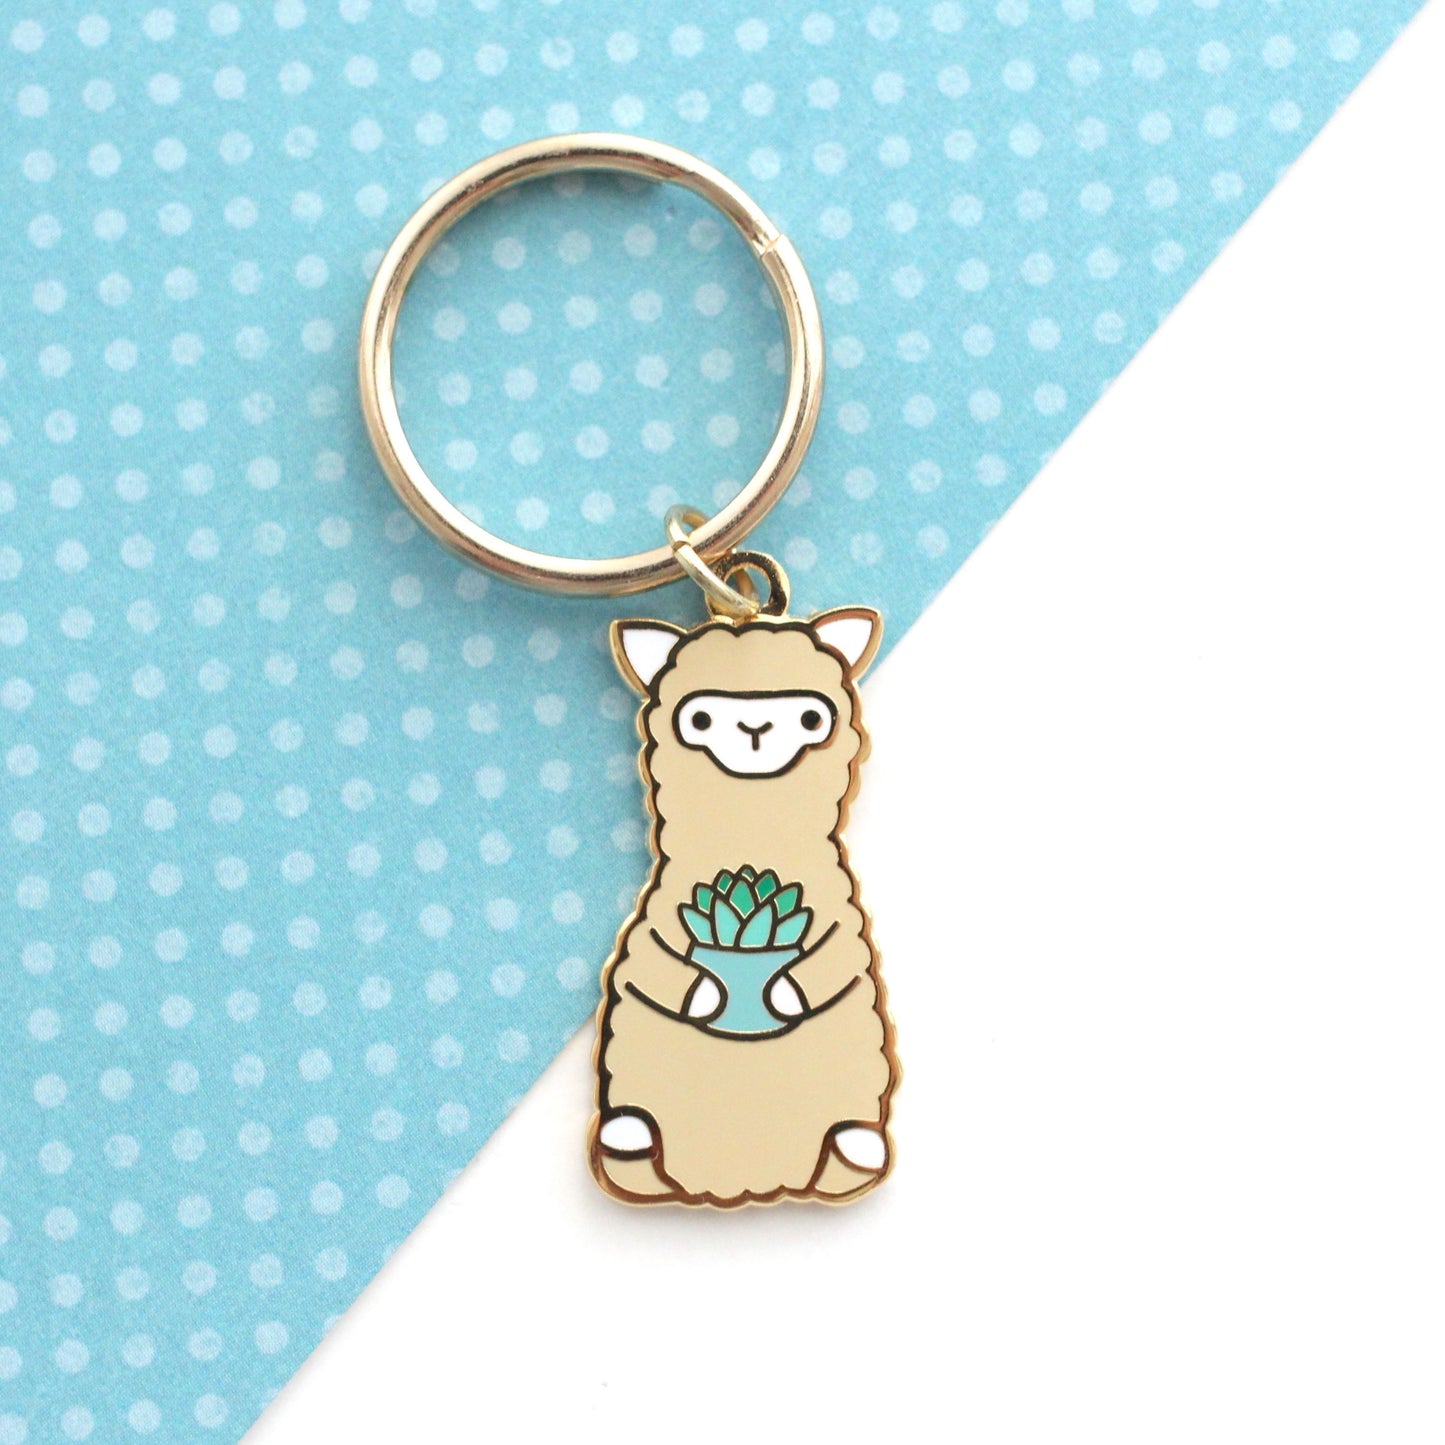 2 Alpaca keychains for 18 USD: Cactus + Succulent. Cute Llama Keyring Charms by Wild Whimsy Woolies